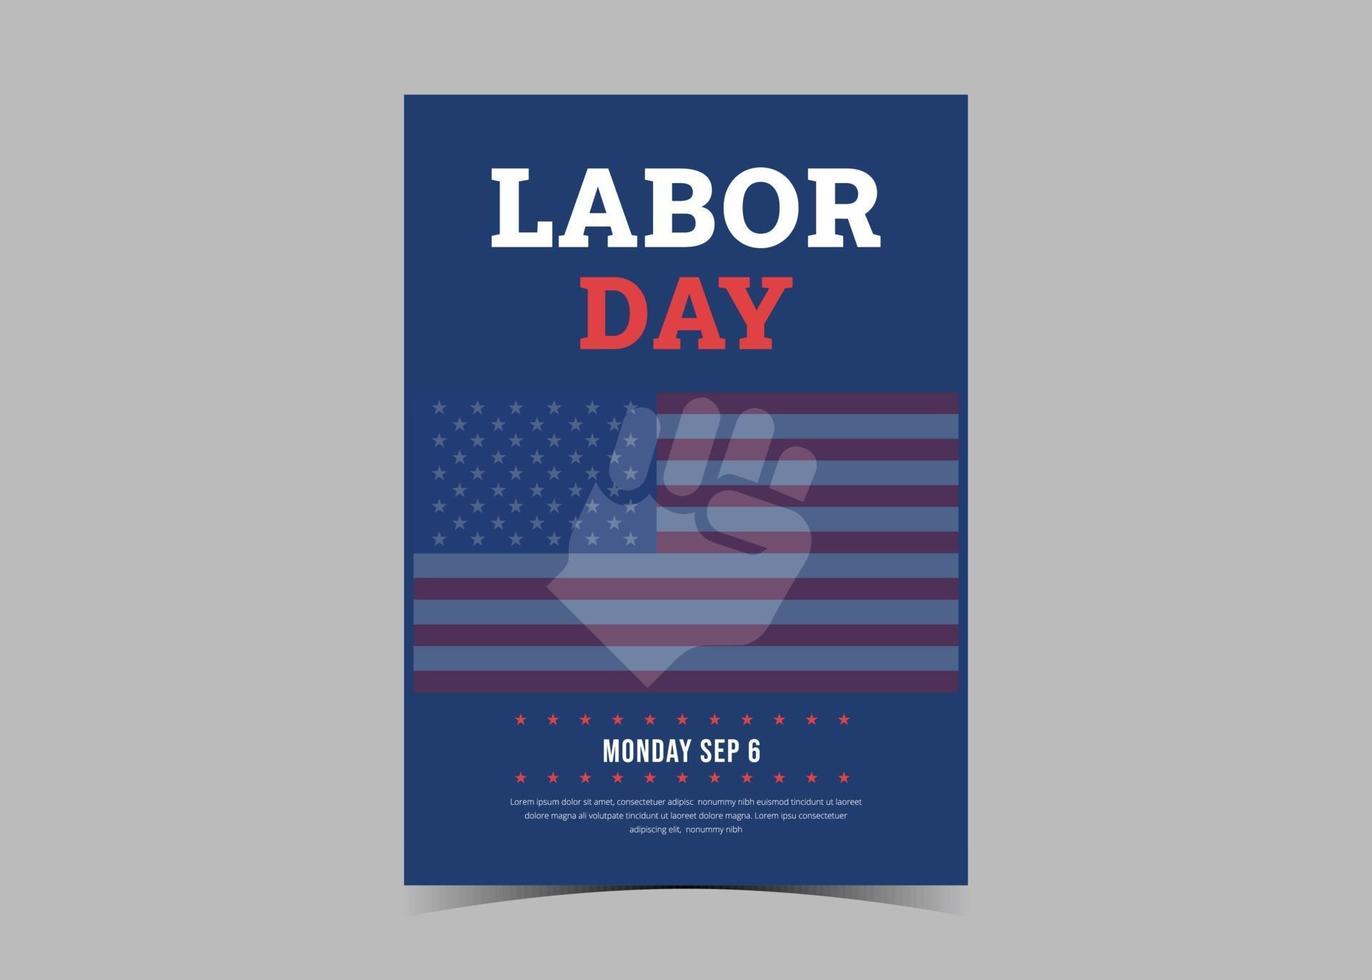 Labor day celebration flyer template design. Labor day event poster vector